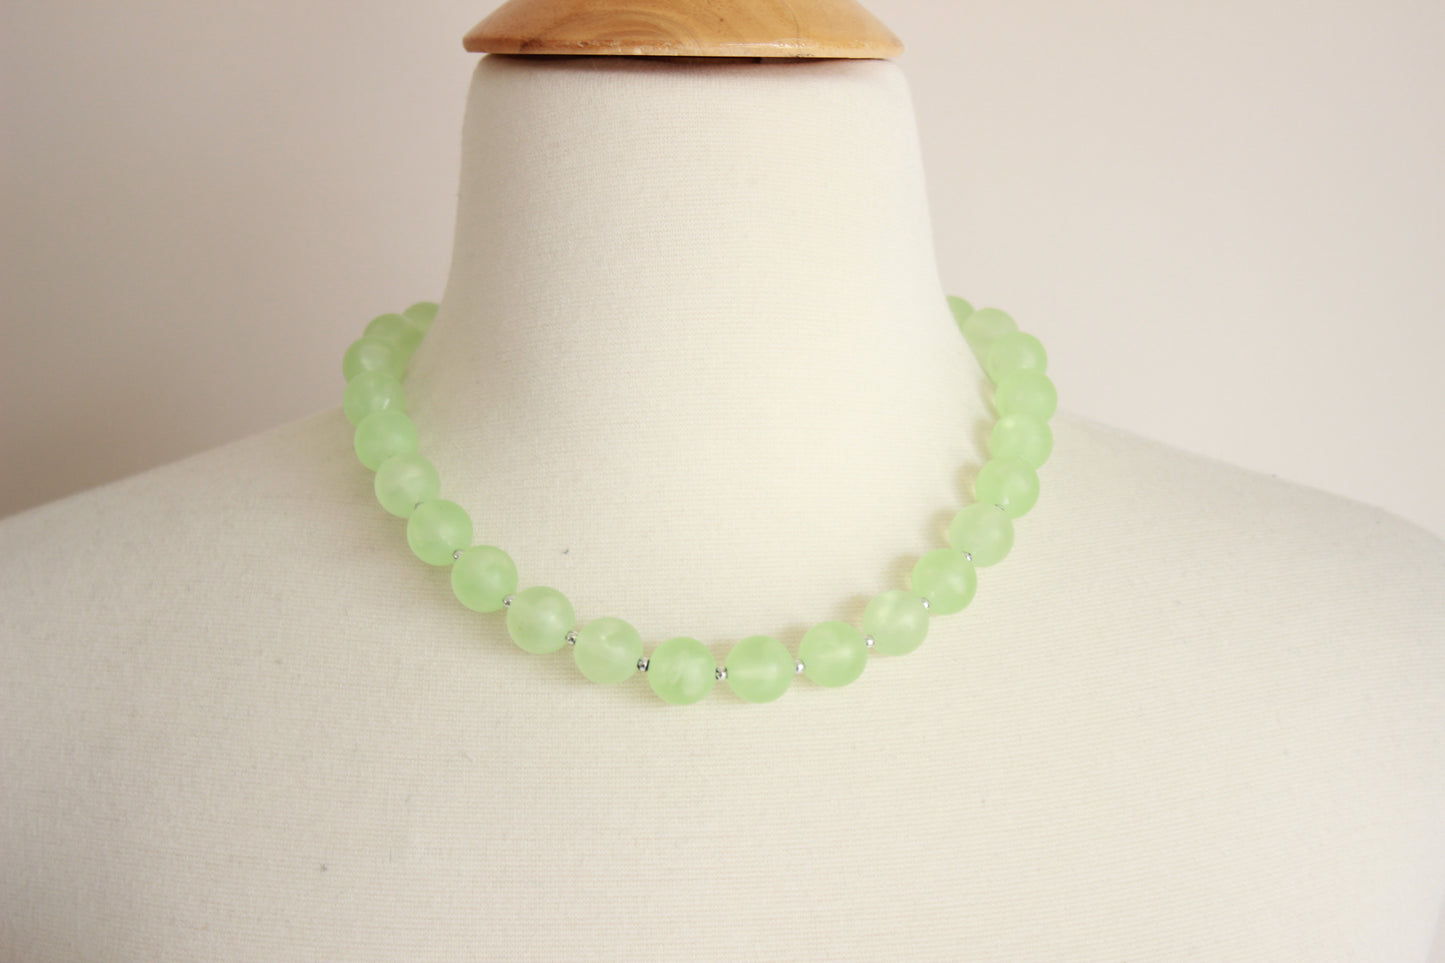 Vintage 1950s Green Round Bead Necklace